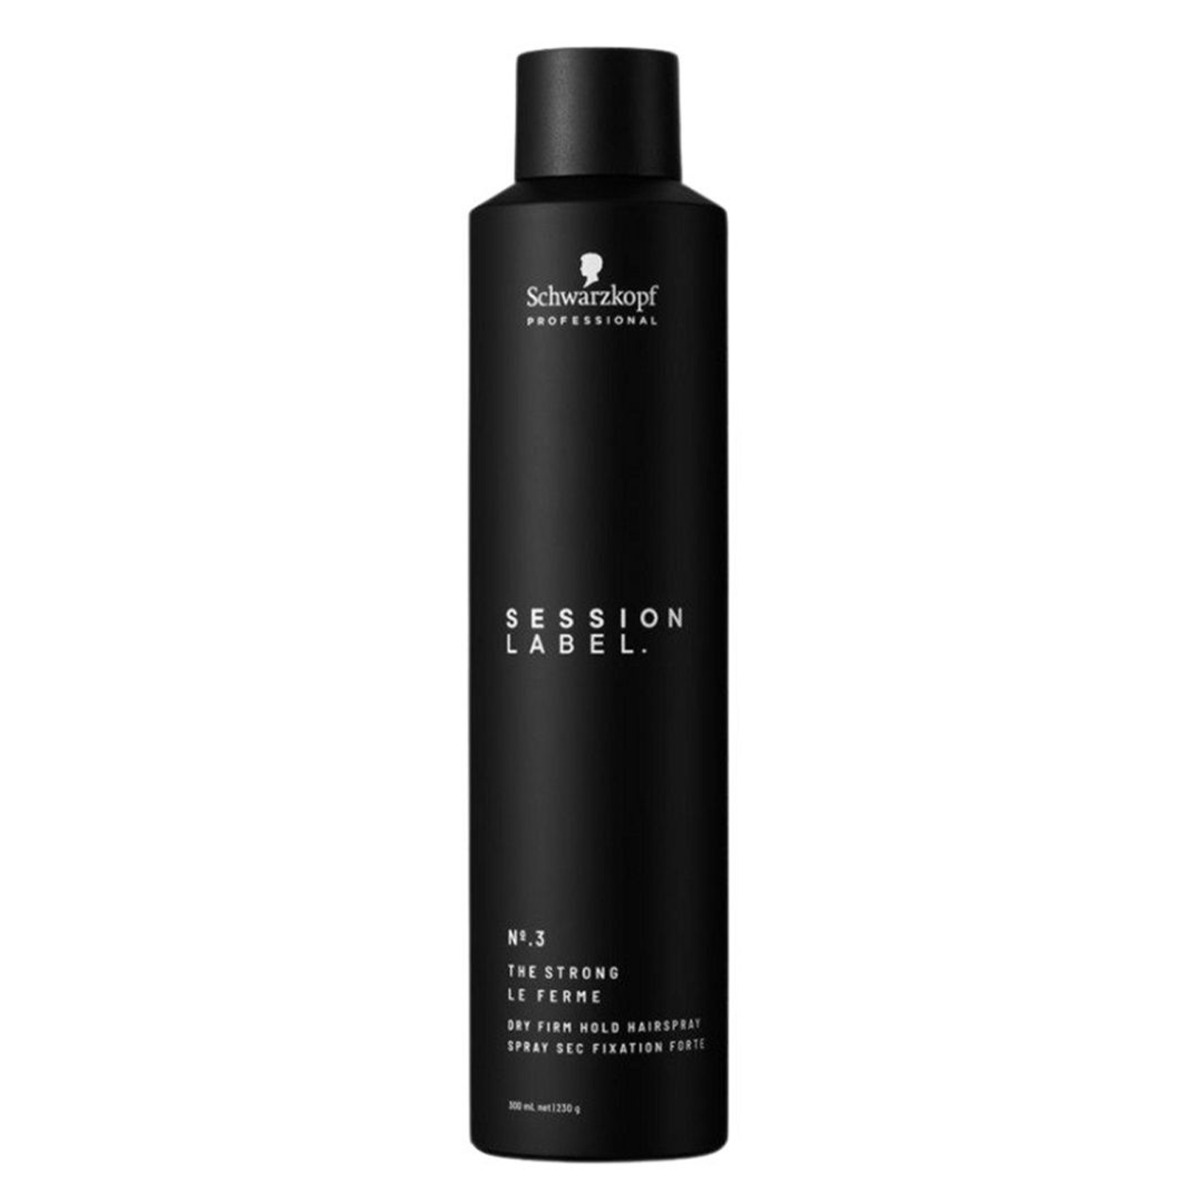 Schwarzkopf Professional Session Label The Strong Le Ferme Hair spray, 300ml